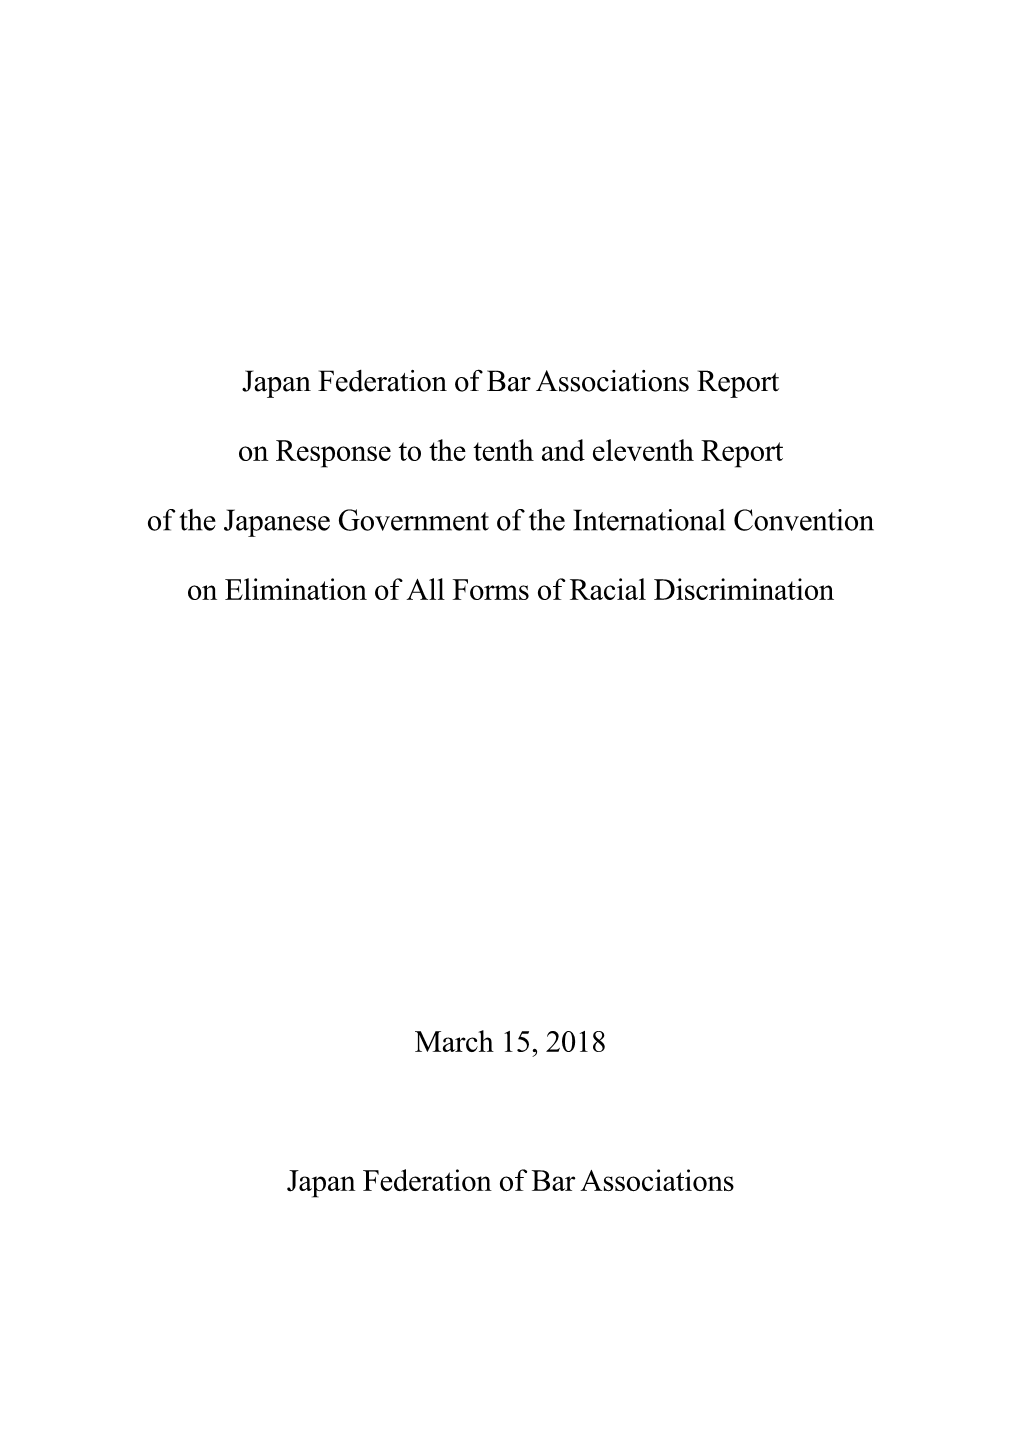 Japan Federation of Bar Associations Report on Response to the Tenth and Eleventh Report of the Japanese Government of the Inter